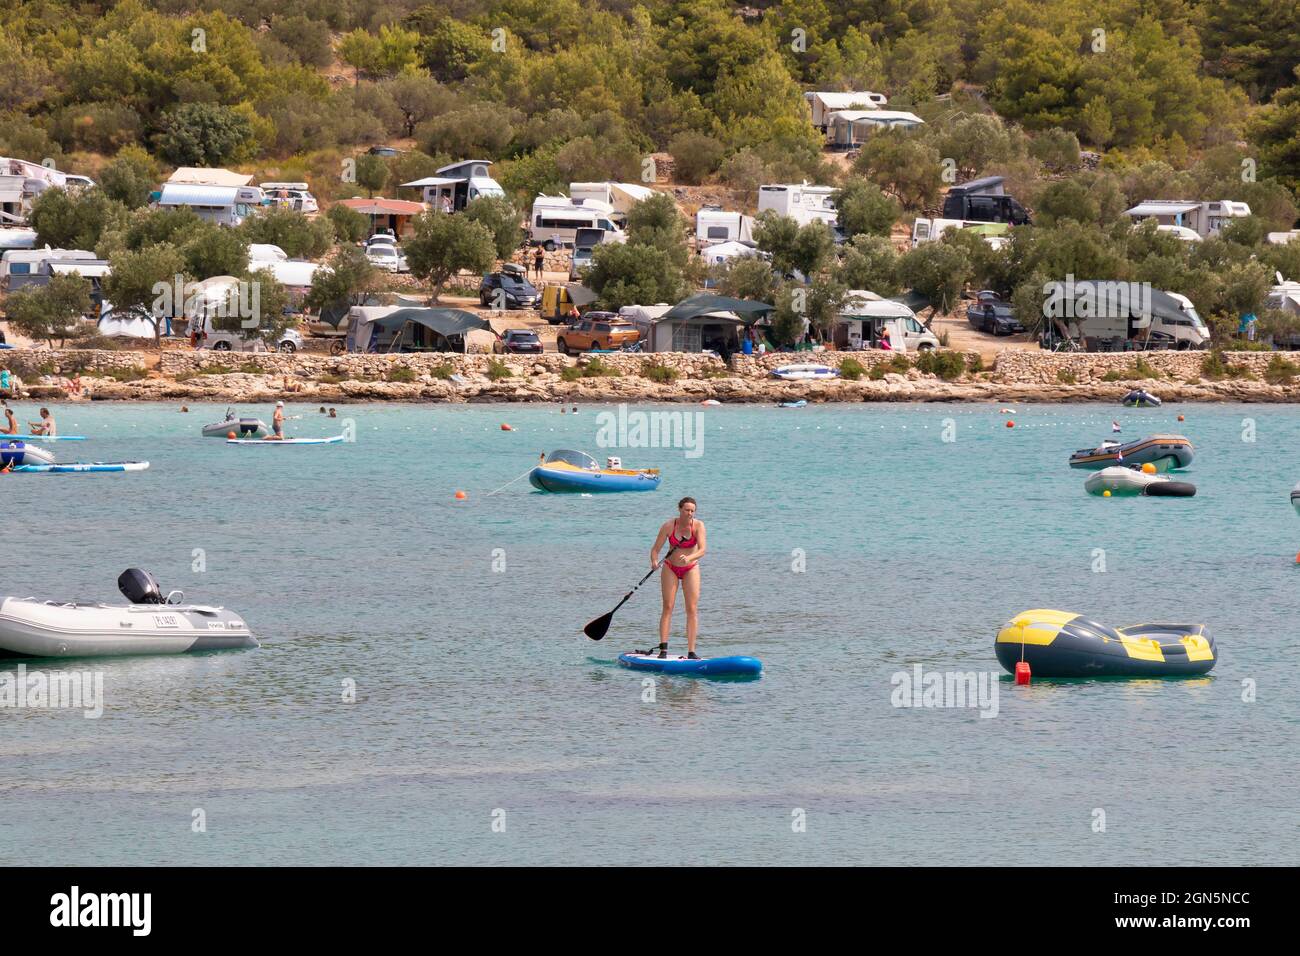 Kosirina, Murter, Croatia - August 24, 2021: Inflatable boats moored in a calm bay and people paddling on stand up boards,  on a campsite beach Stock Photo